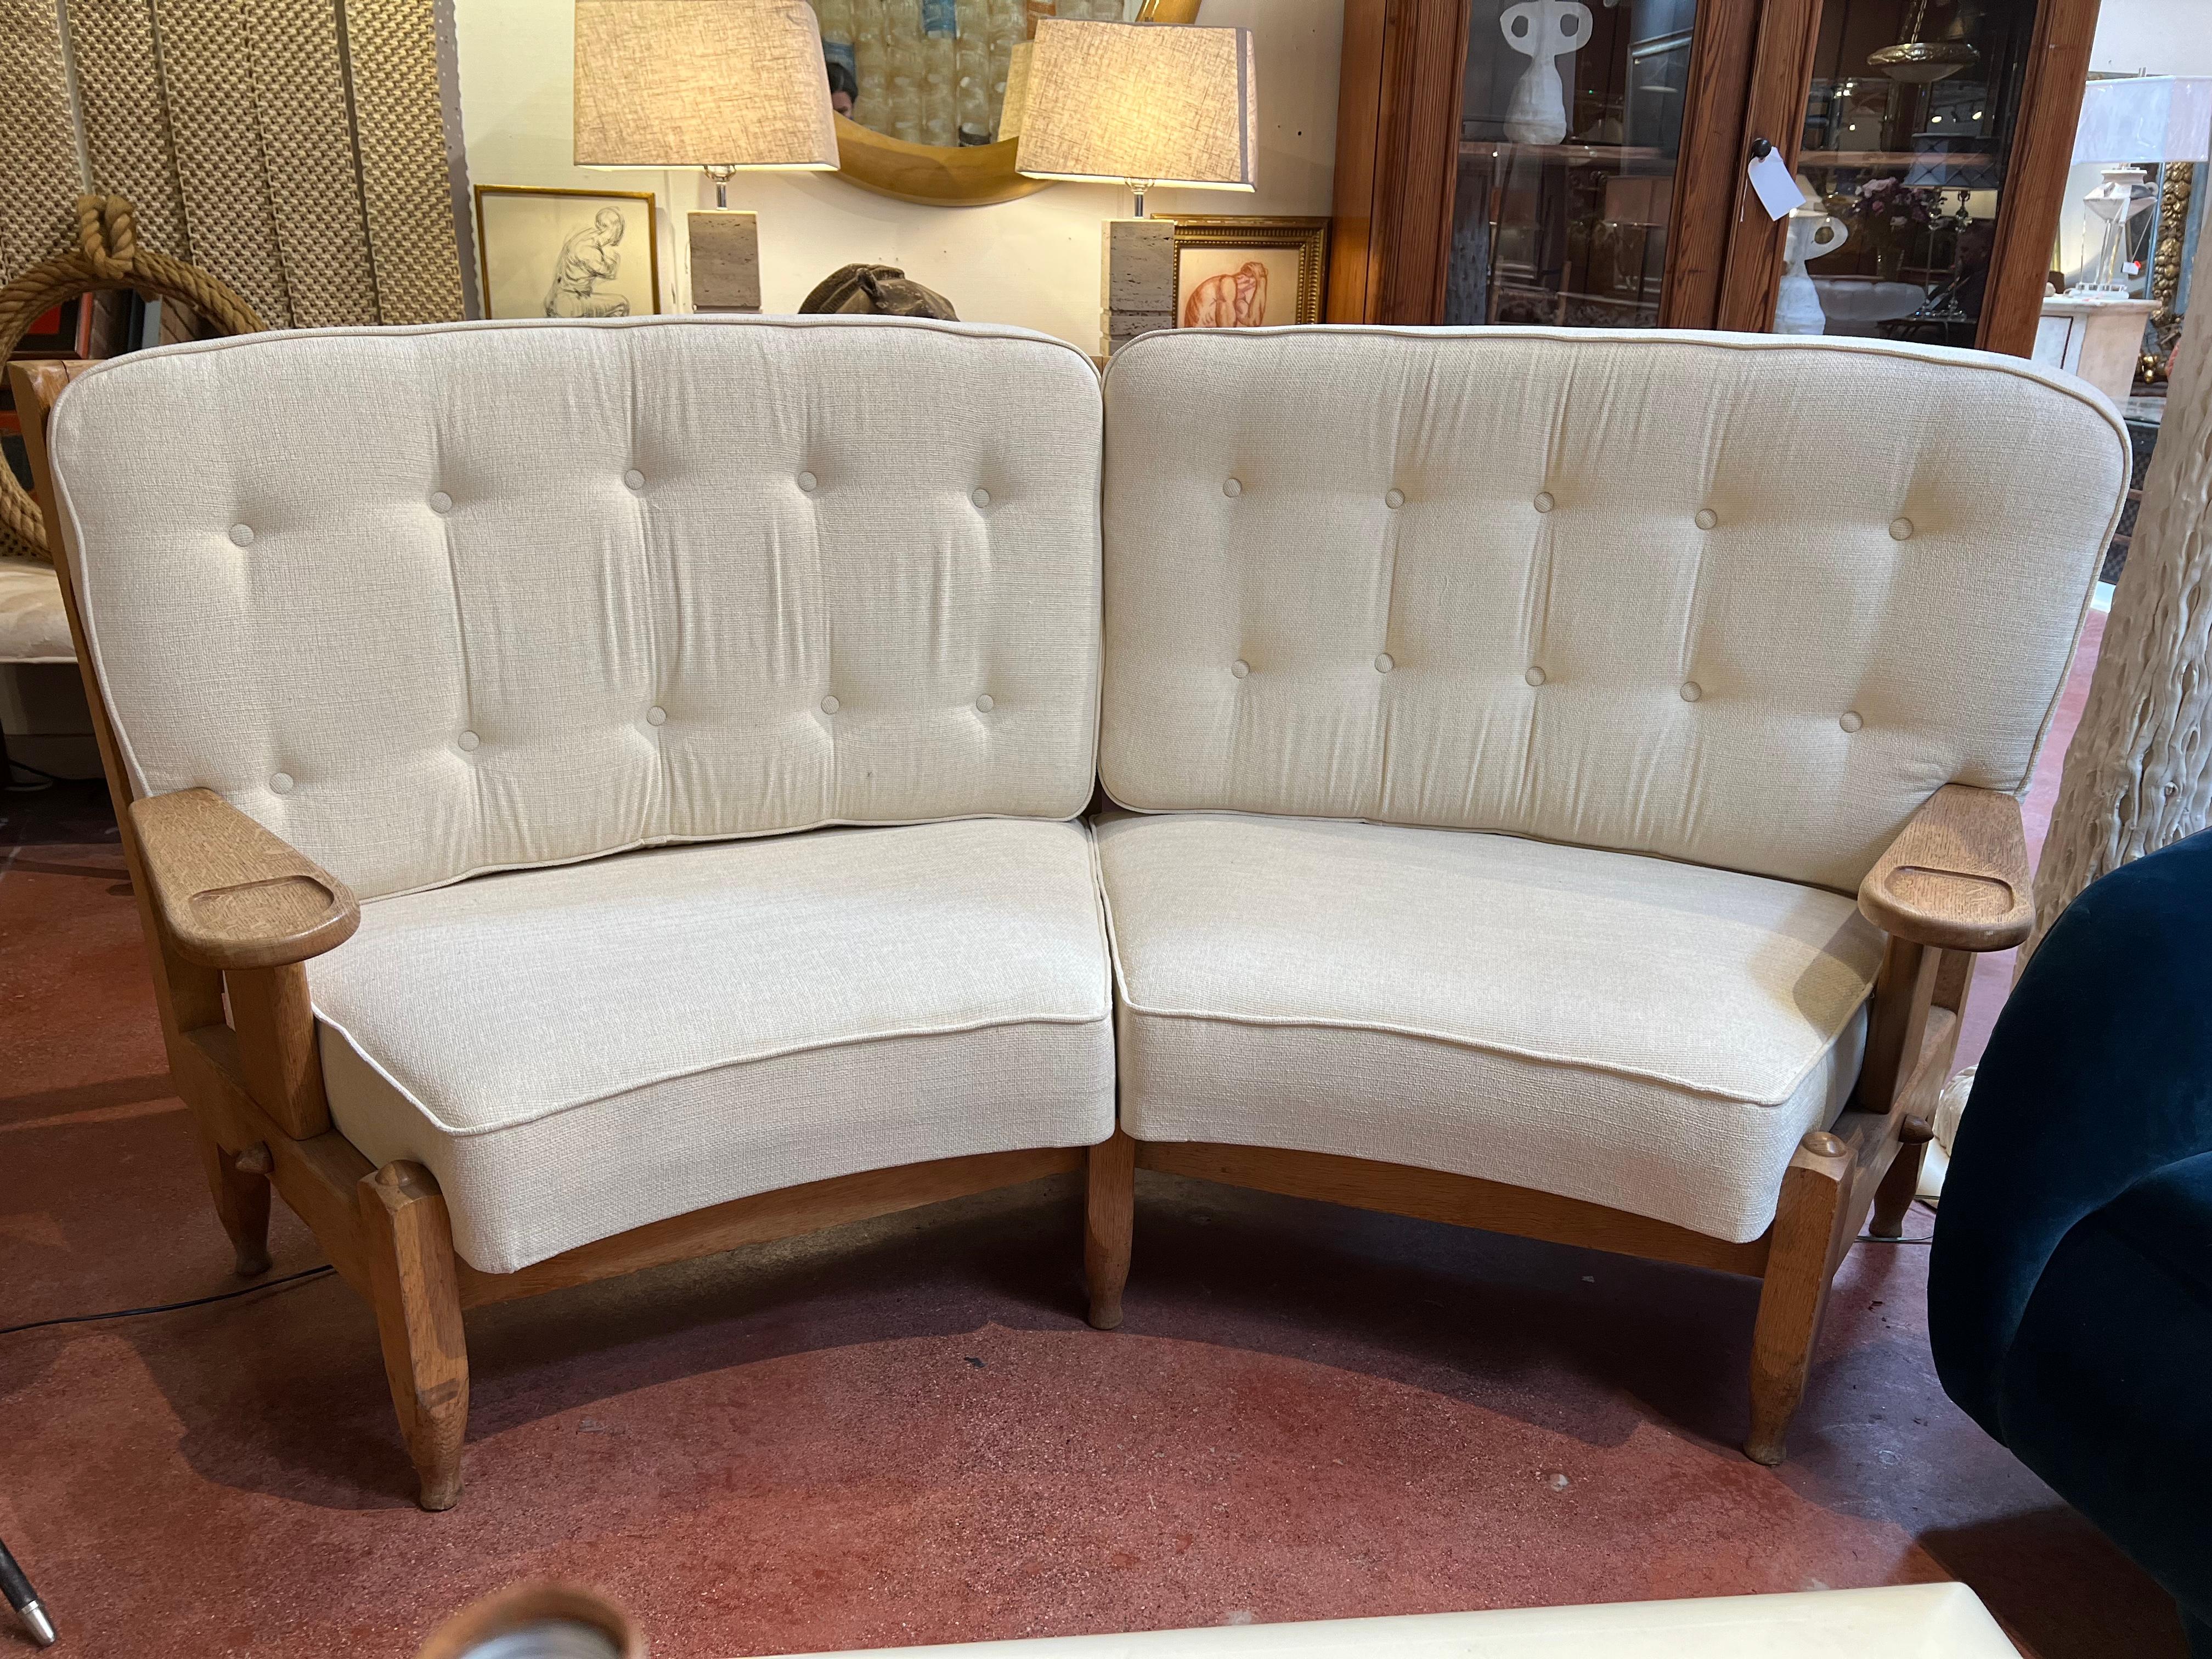 1950’s French oak sofa designed by Guillerme et Chambron. New upholstery. Arm height 22